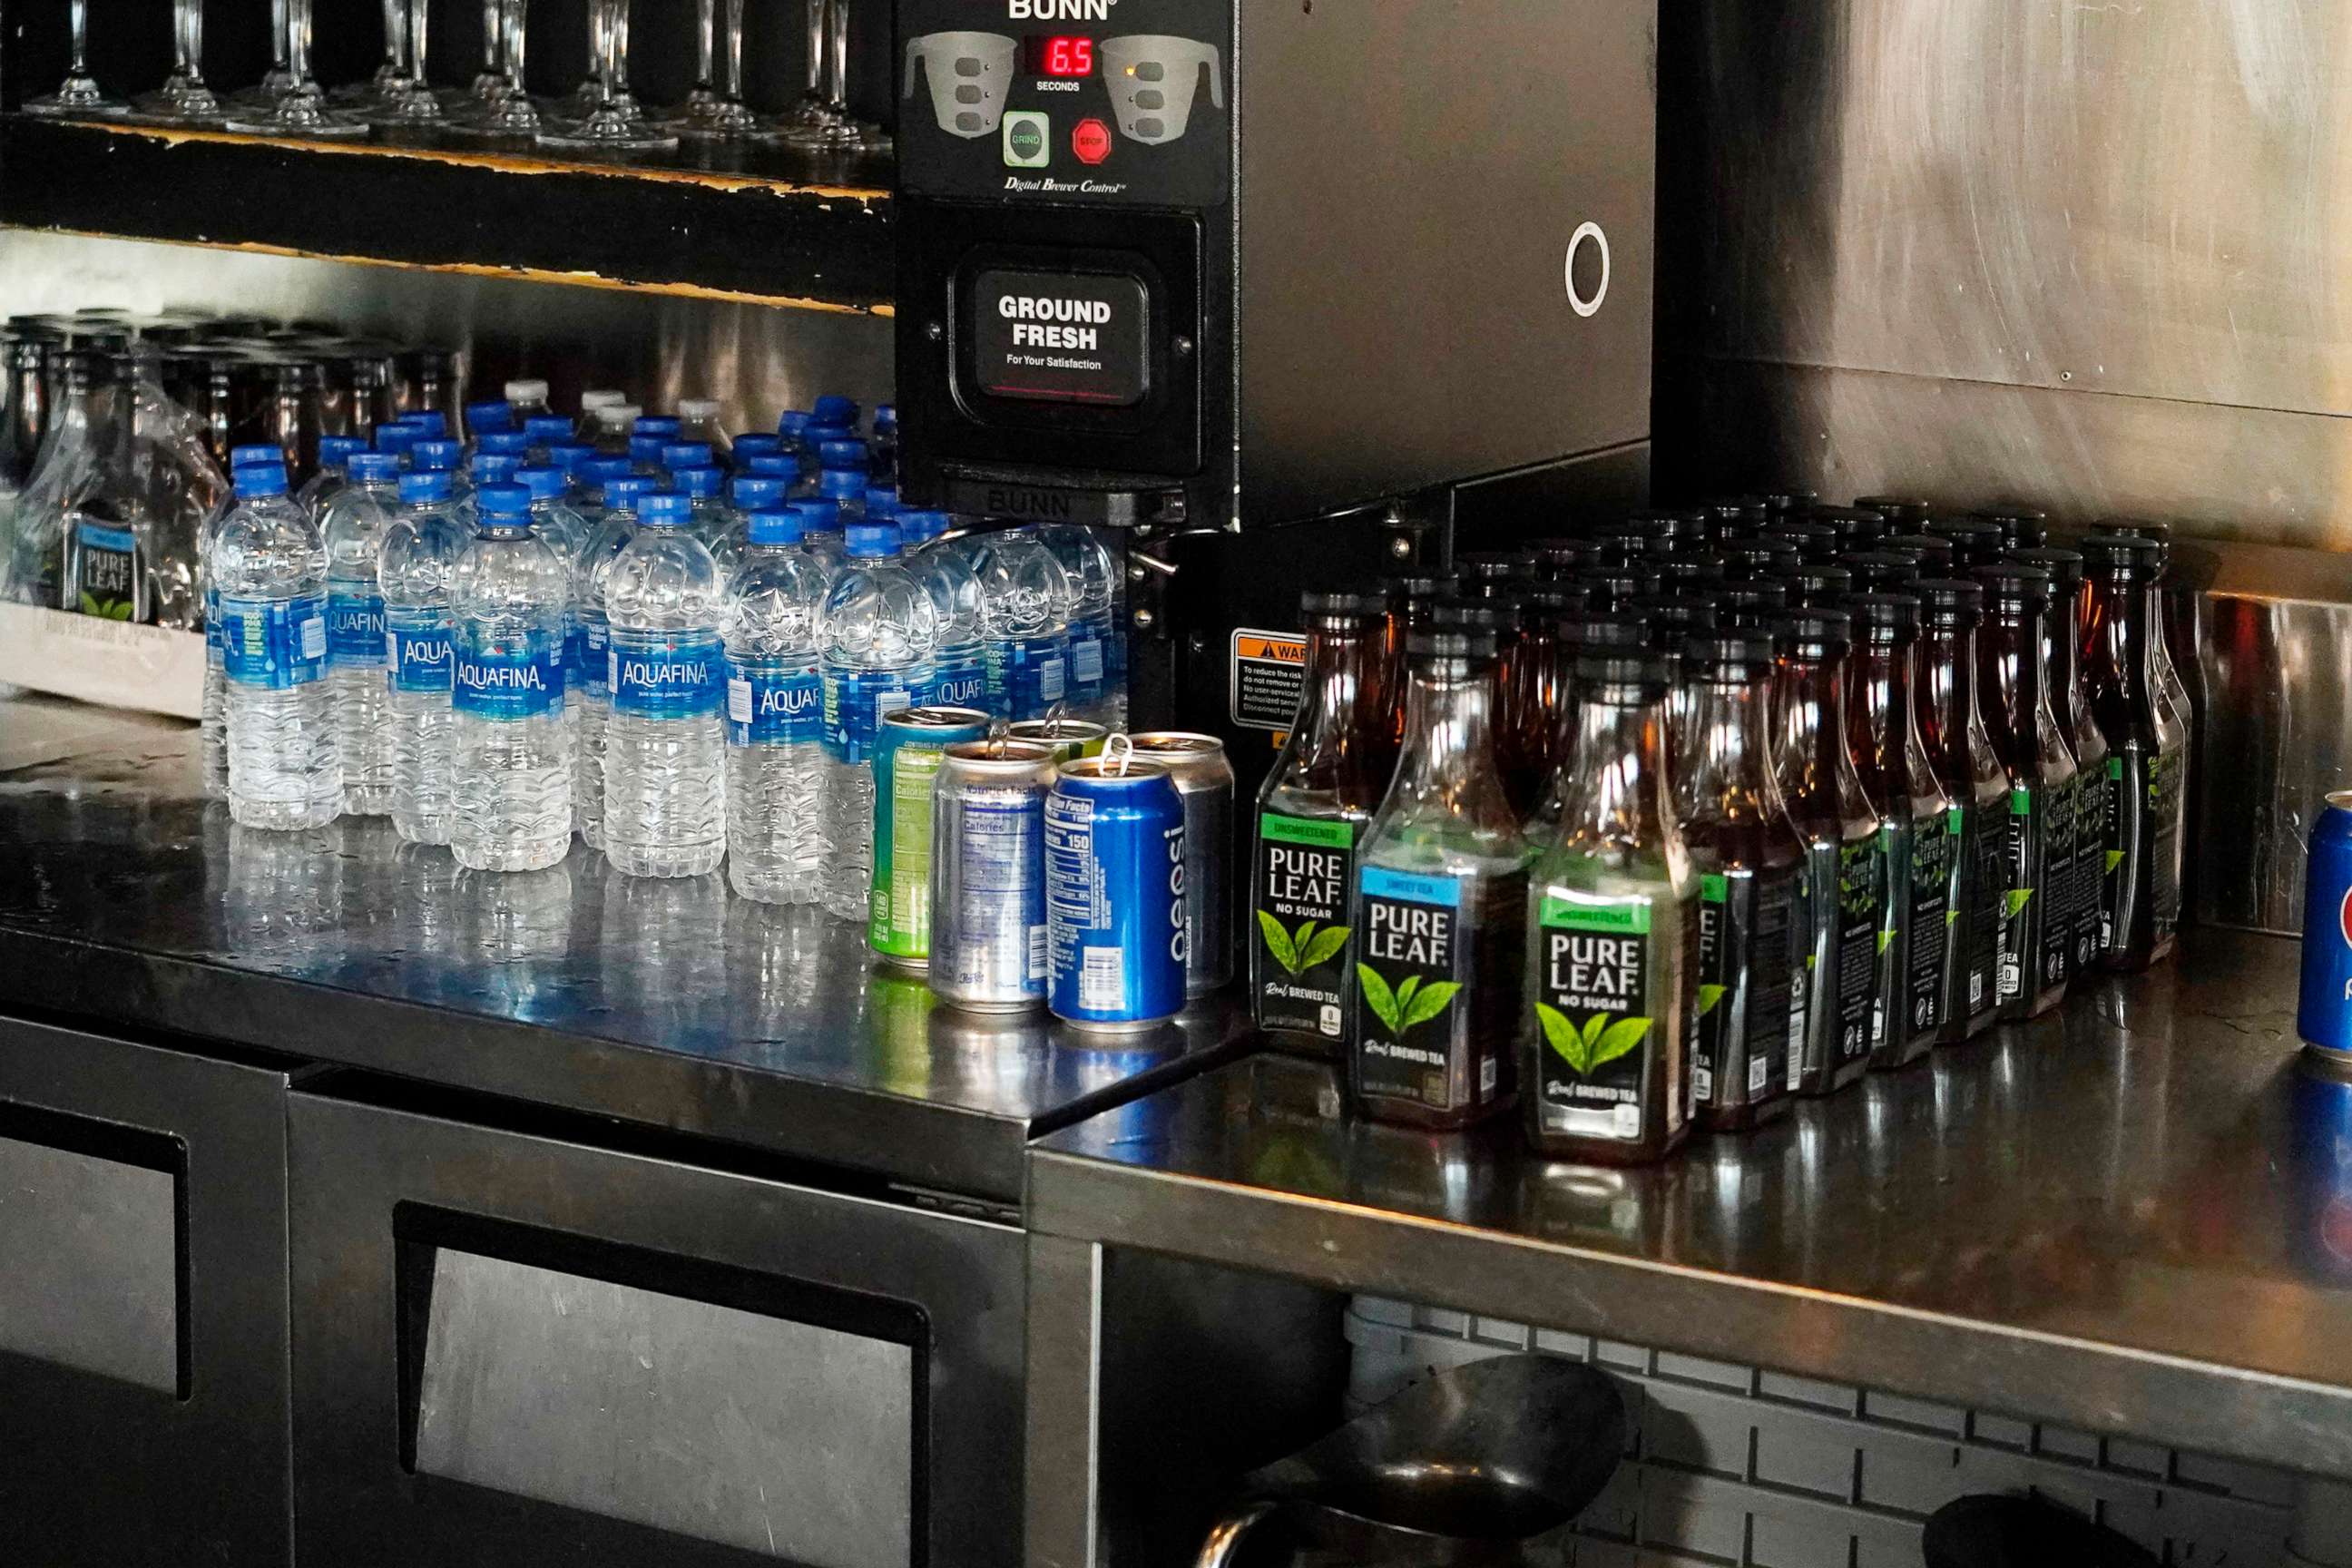 PHOTO: Walker's Drive-In, a popular mid-city eatery in Jackson, Miss., has loaded up with bottles of drinking water and pre-made tea, during the latest challenges due to longstanding water system problems in Jackson, Miss., Aug. 30, 2022.